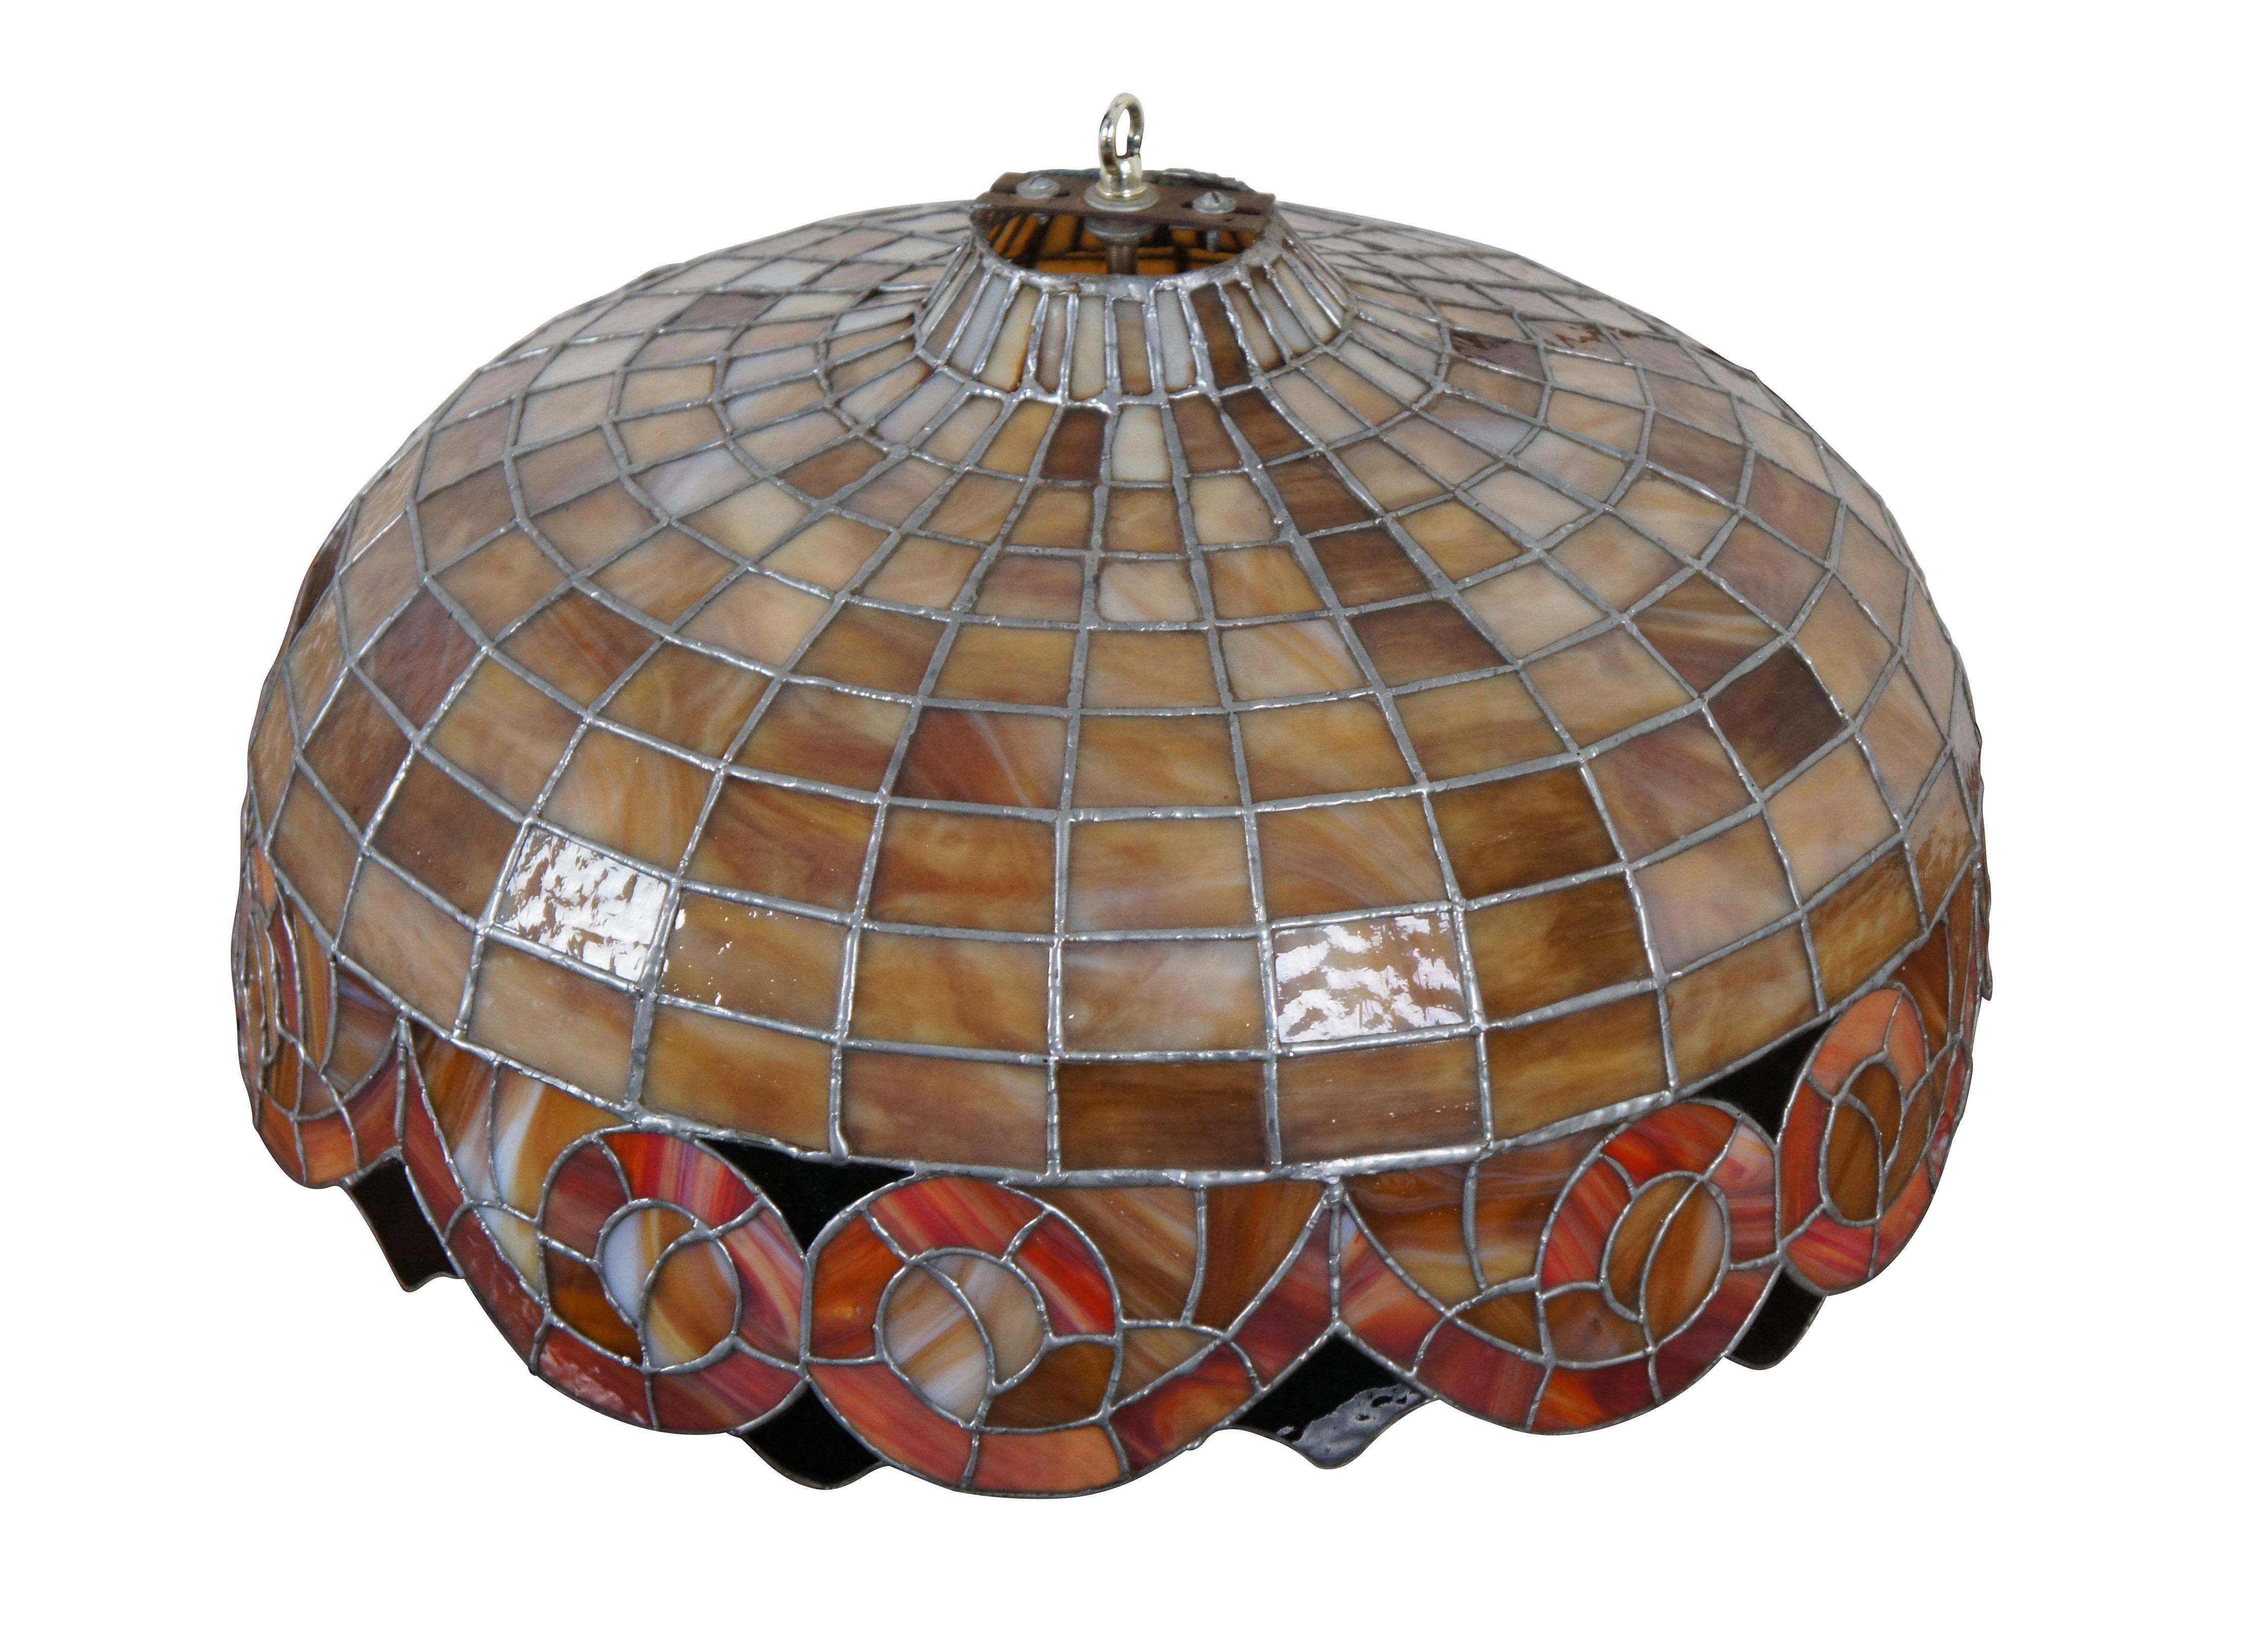 A large and impressive vintage Tiffany style swag light chandelier shade featuring stained slag glass in stacked geometric and serpentine patterns.

Dimensions:
22” x 11.5” (Diameter x Height)